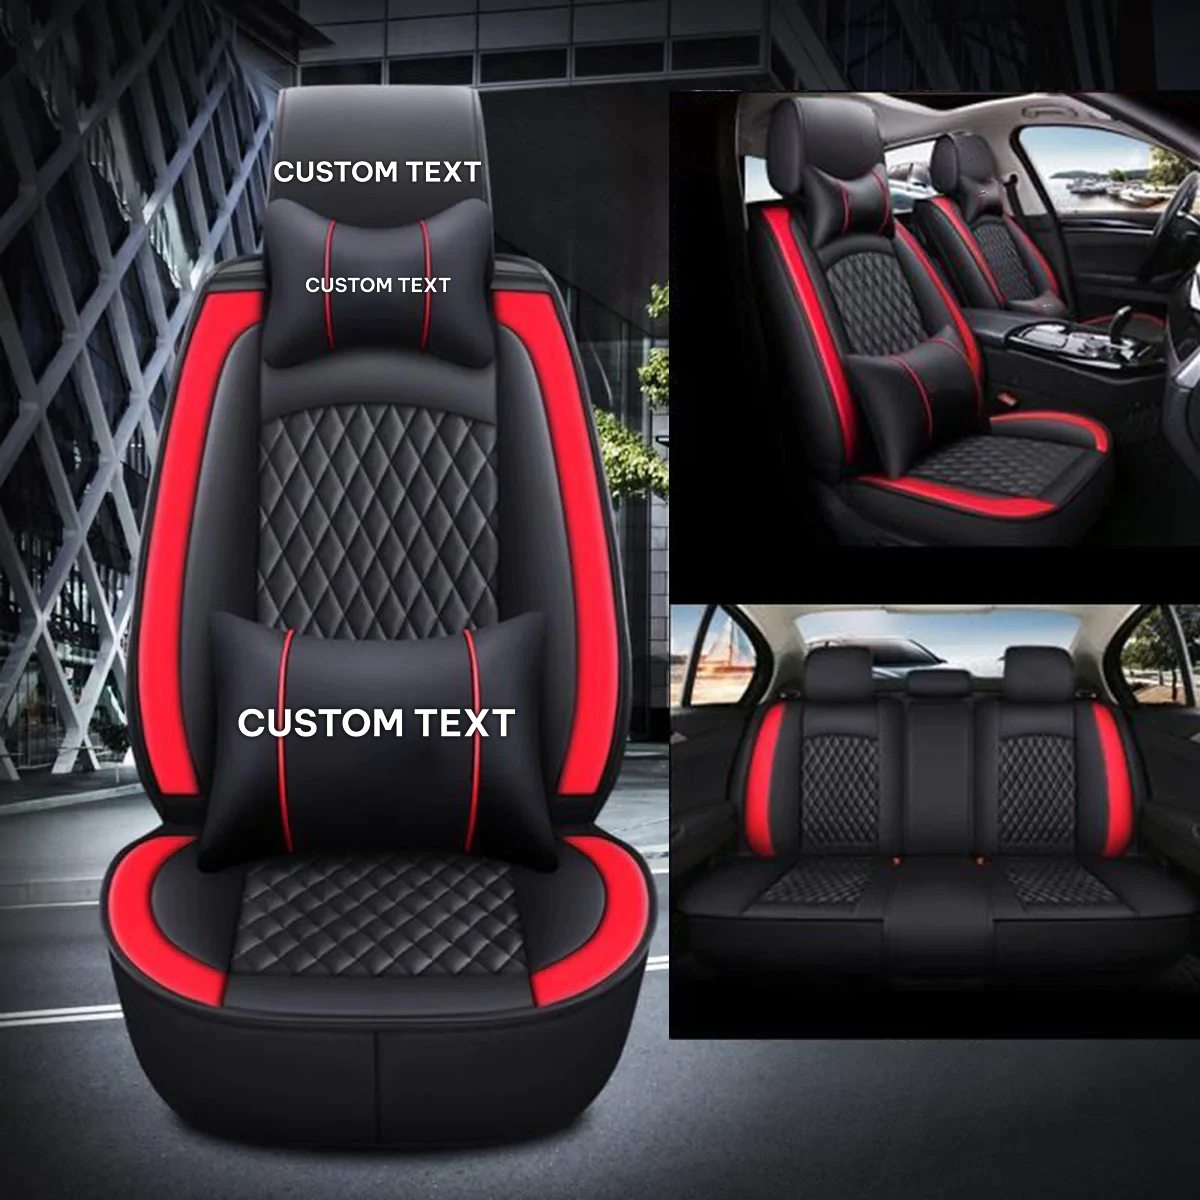 Custom Text For Seat Covers 5 Seats Full Set, Custom Fit For Your Cars, Leatherette Automotive Seat Cushion Protector Universal Fit, Vehicle Auto Interior Decor FM13988